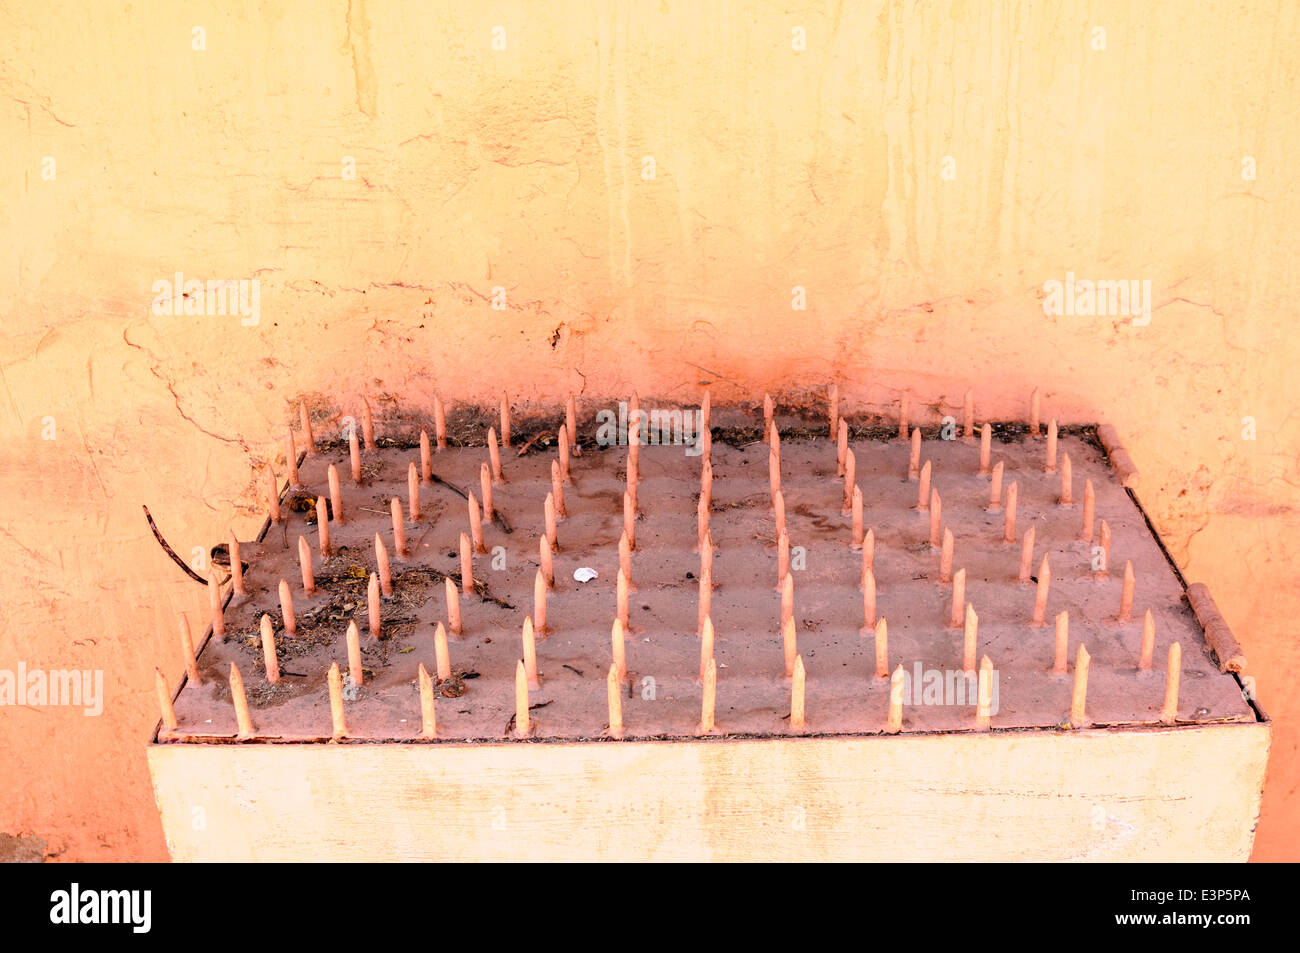 Spikes on a street cabinet to prevent homeless people sleeping or sitting on it, Marrakech, Morocco Stock Photo